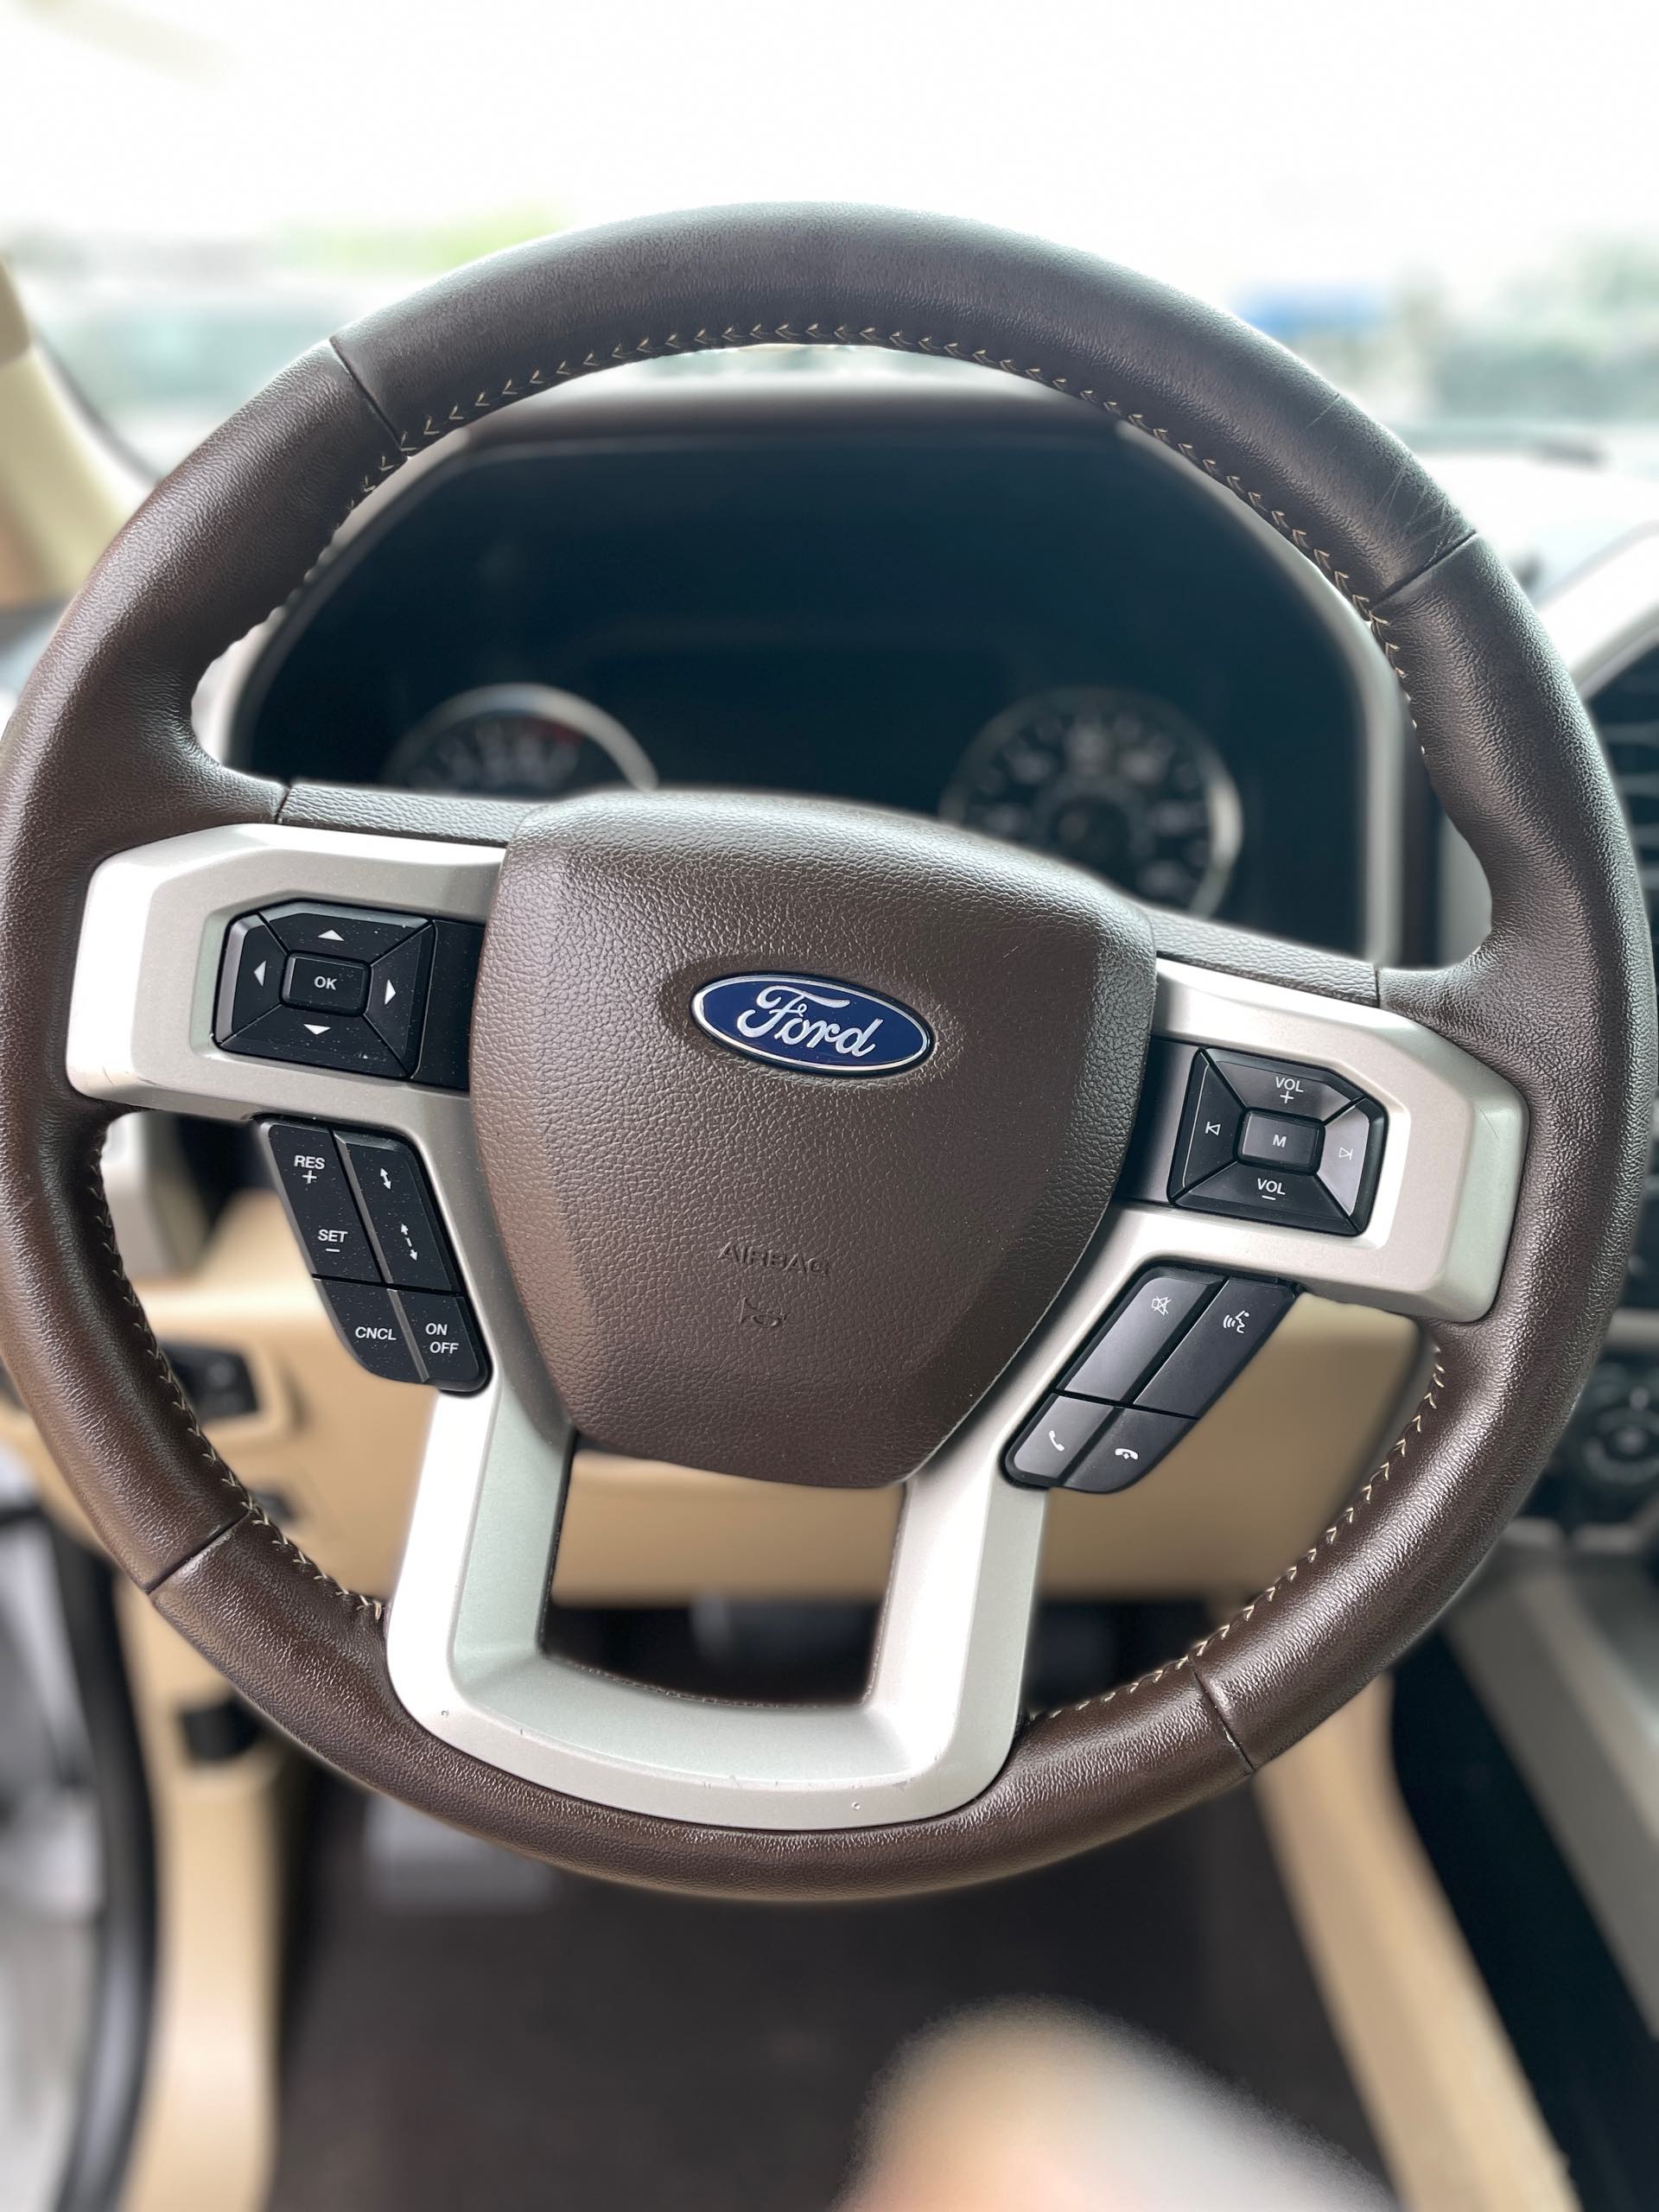 2018 FORD F-150 at Head Indian Motorcycle